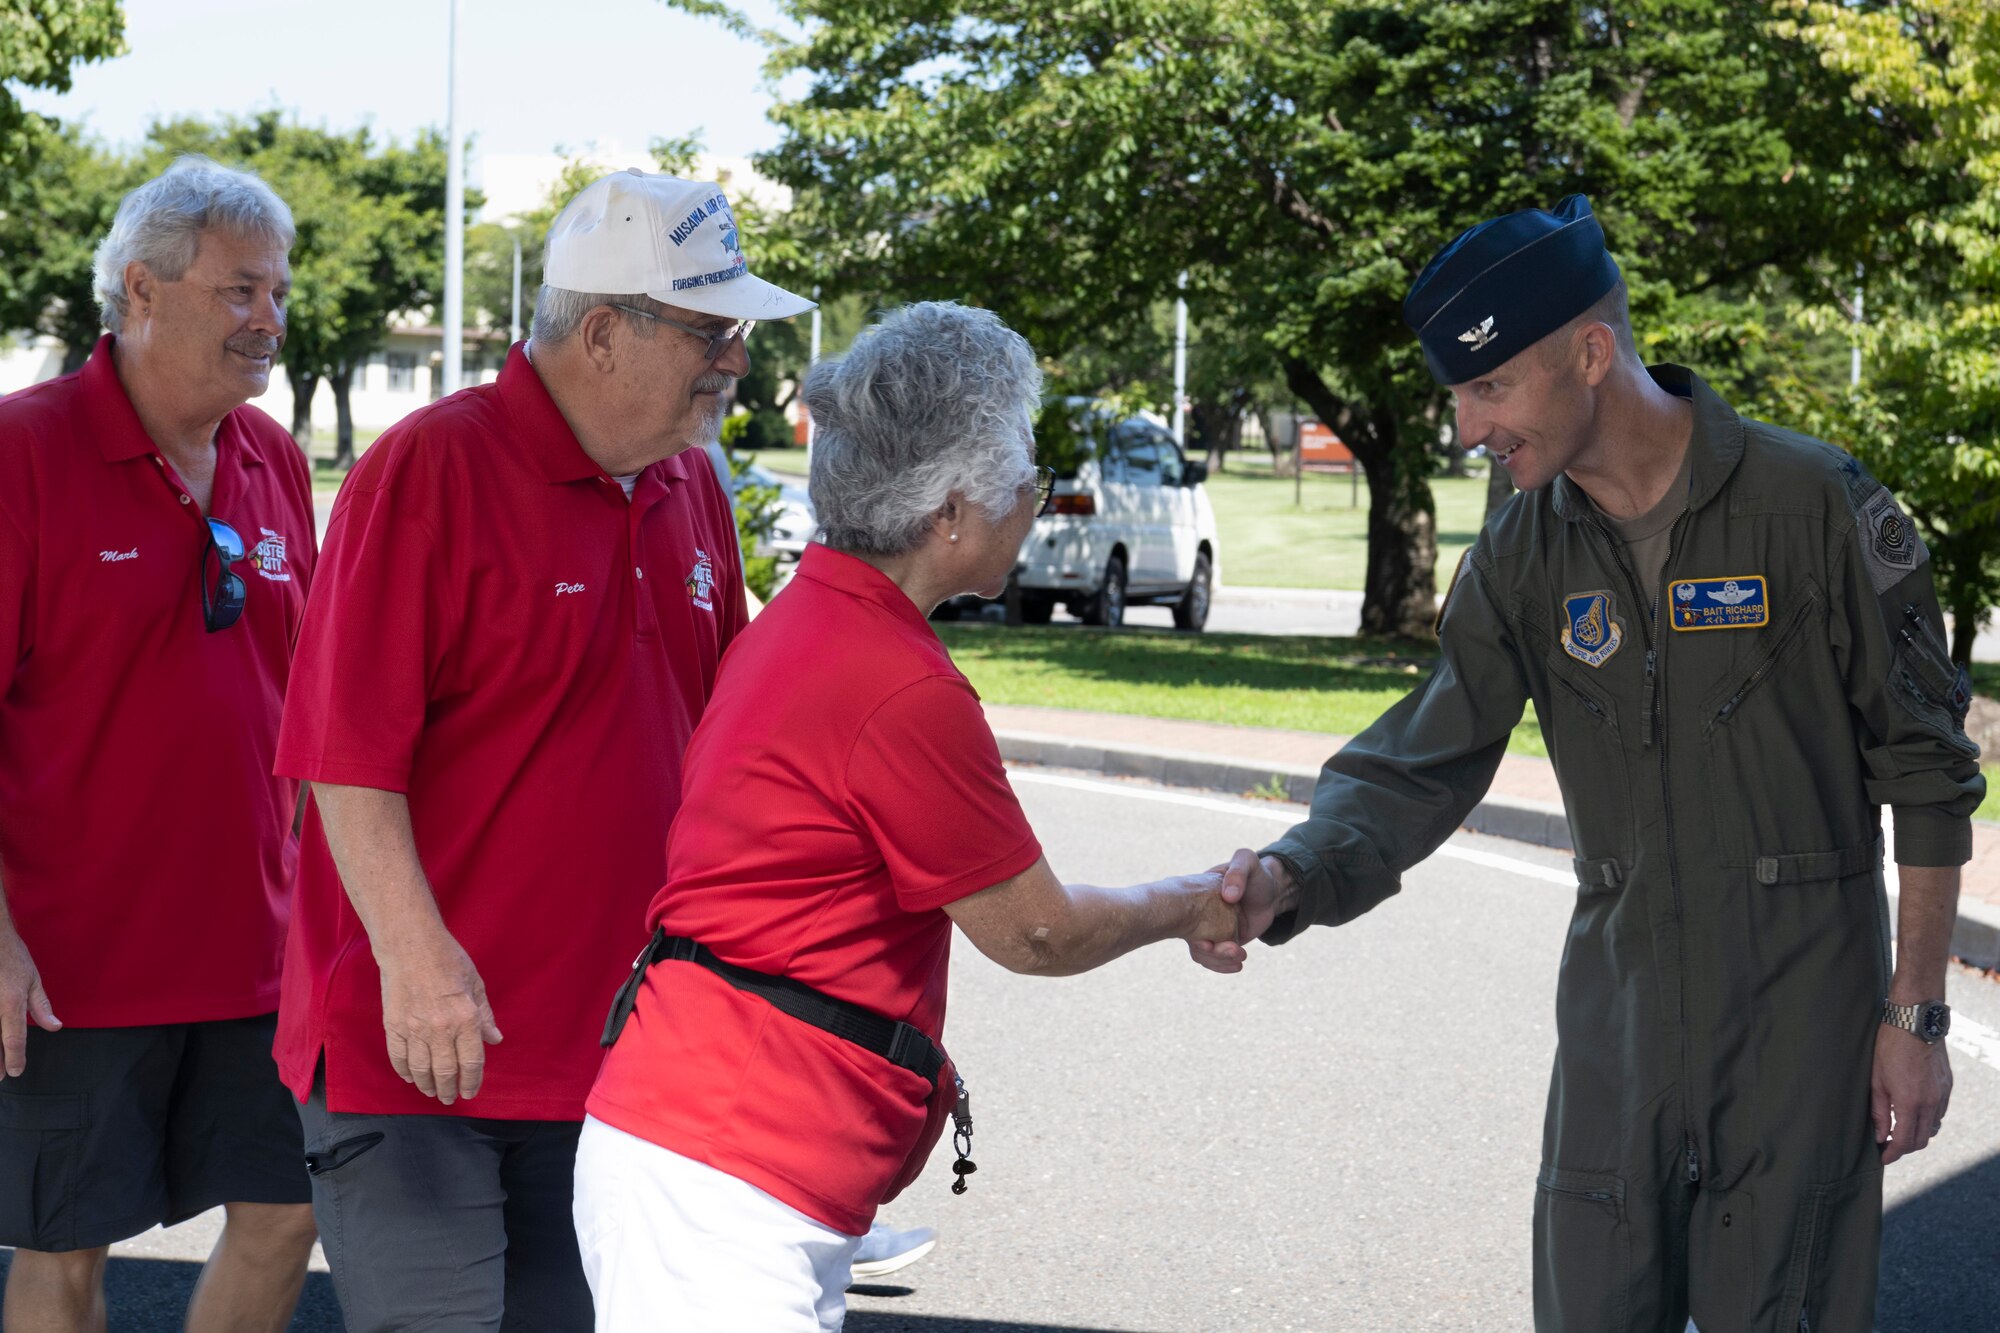 U.S. Air Force Col. Michael Richard, 35th Fighter Wing commander, greets delegates from Wenatchee Valley, Washington.